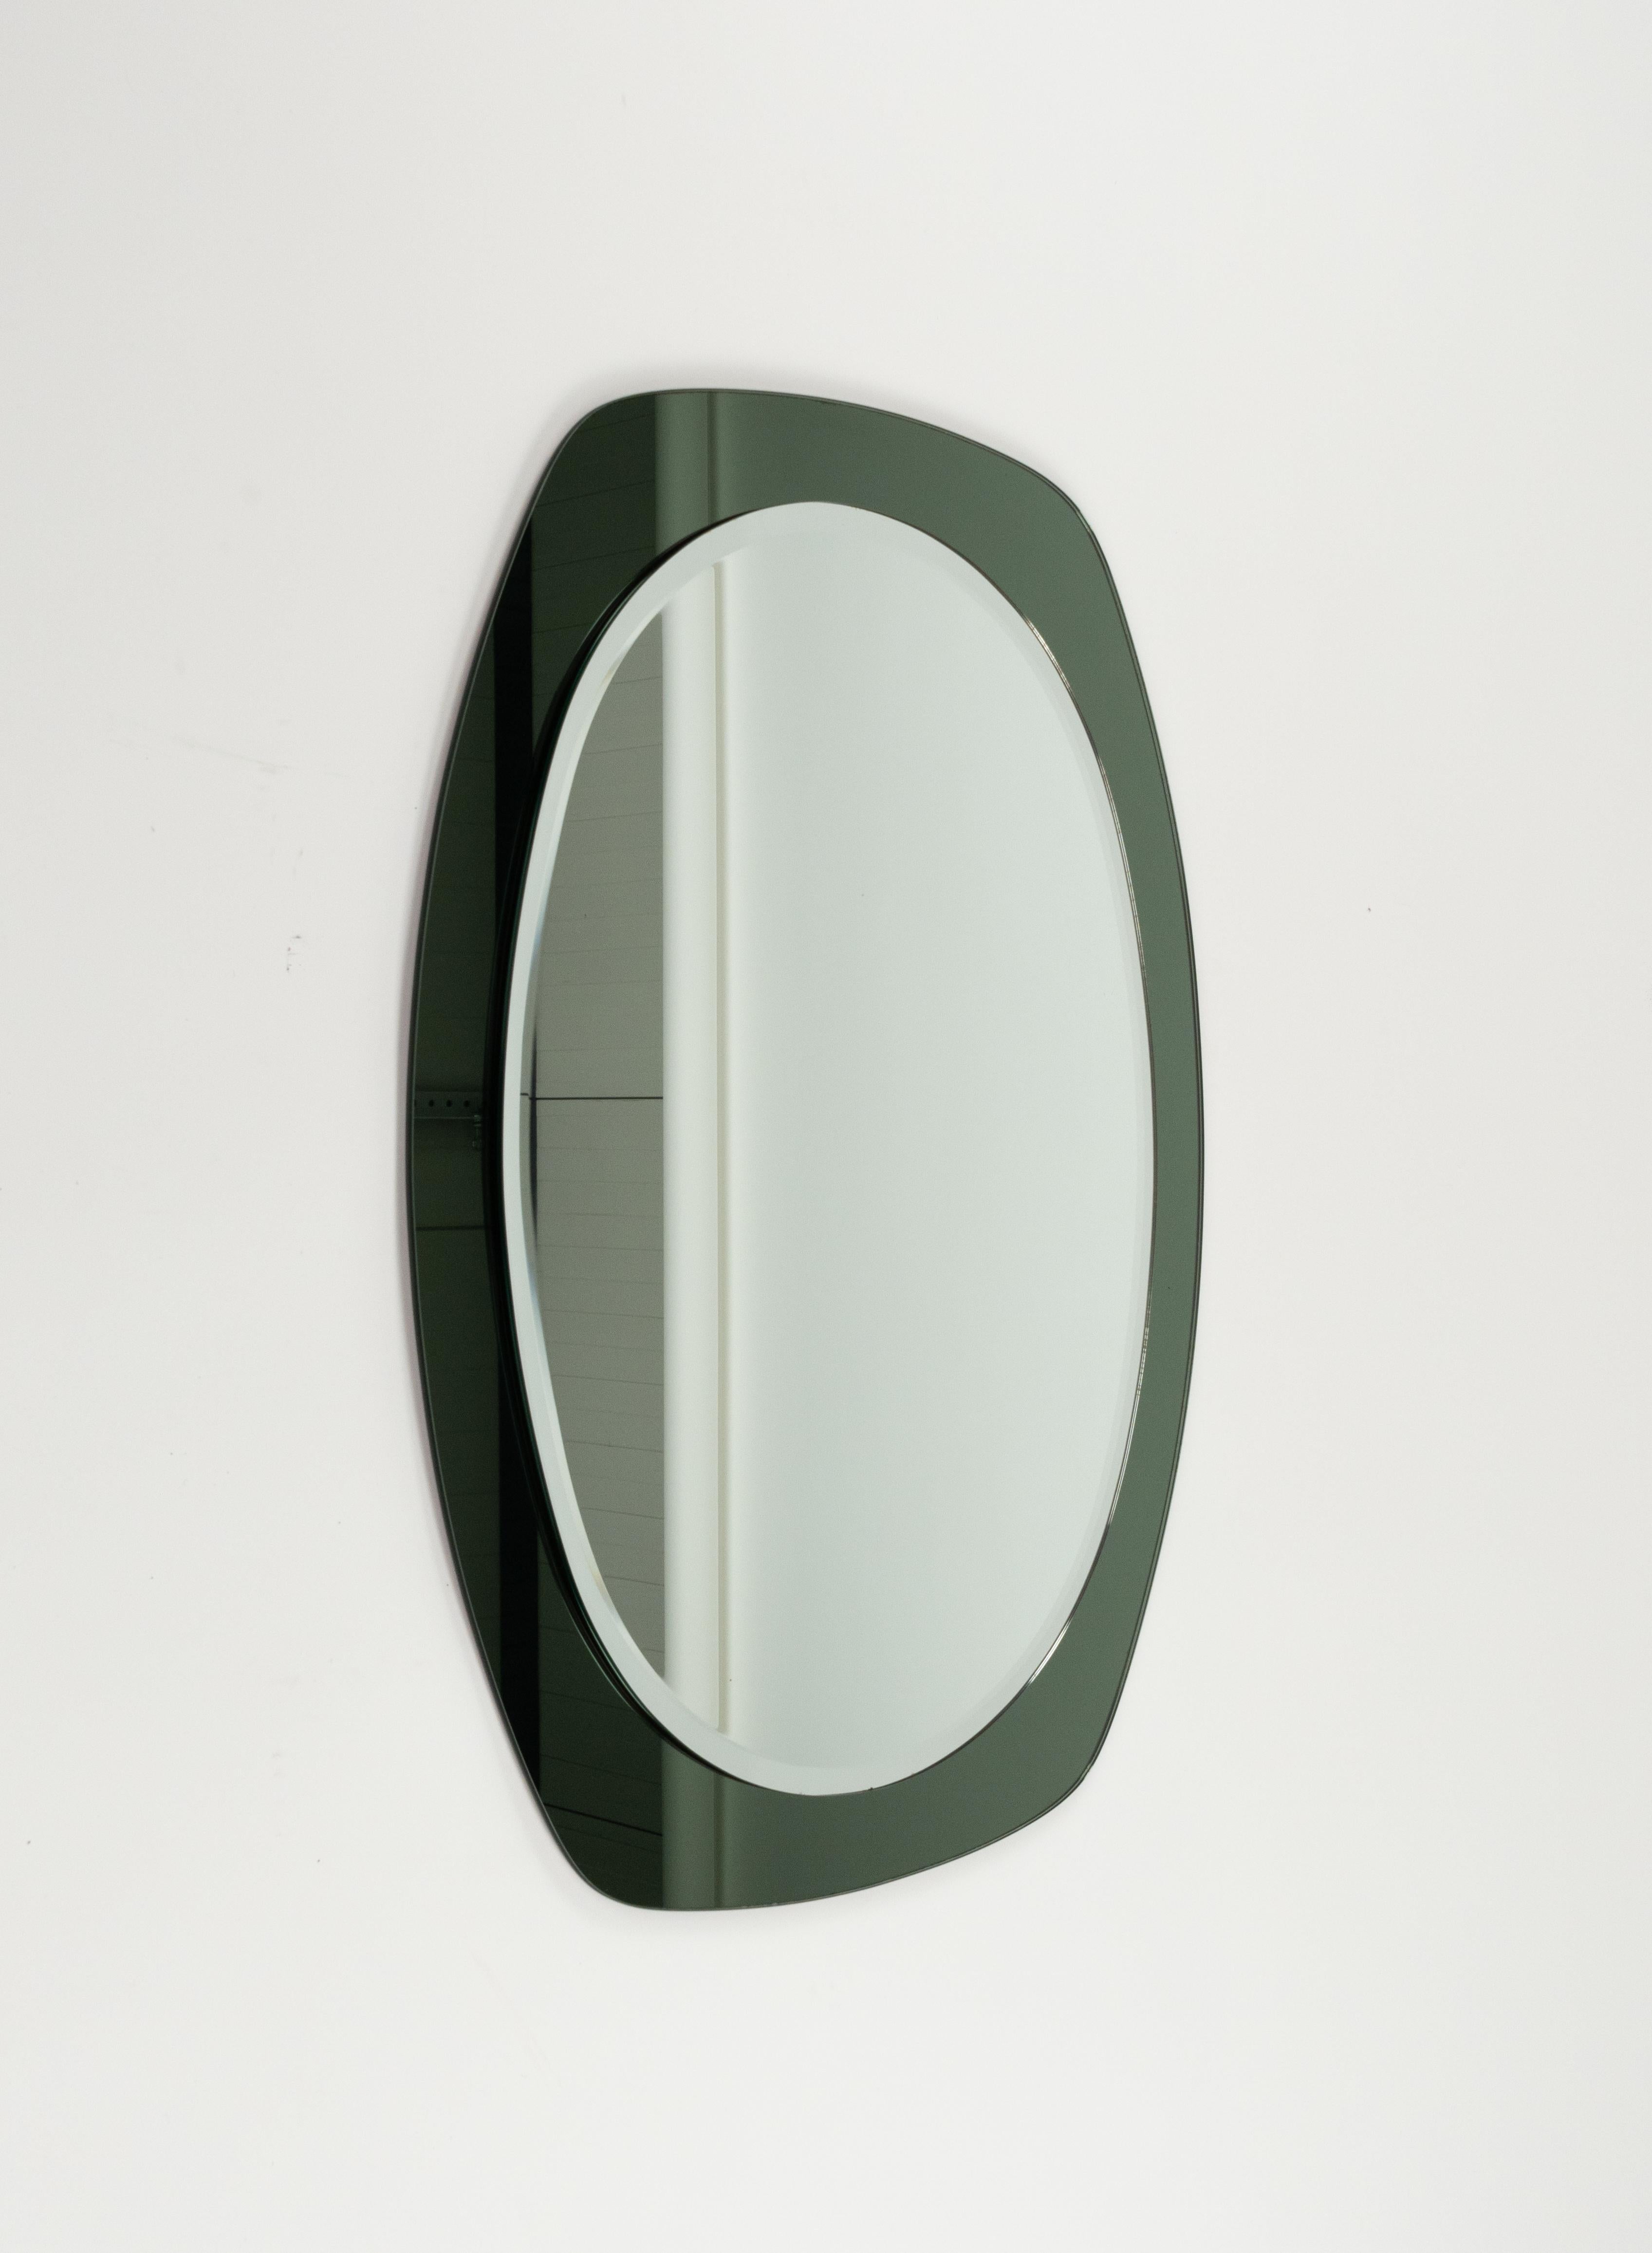 Midcentury Cristal Art Oval Wall Mirror with Green Frame, Italy 1960s For Sale 1